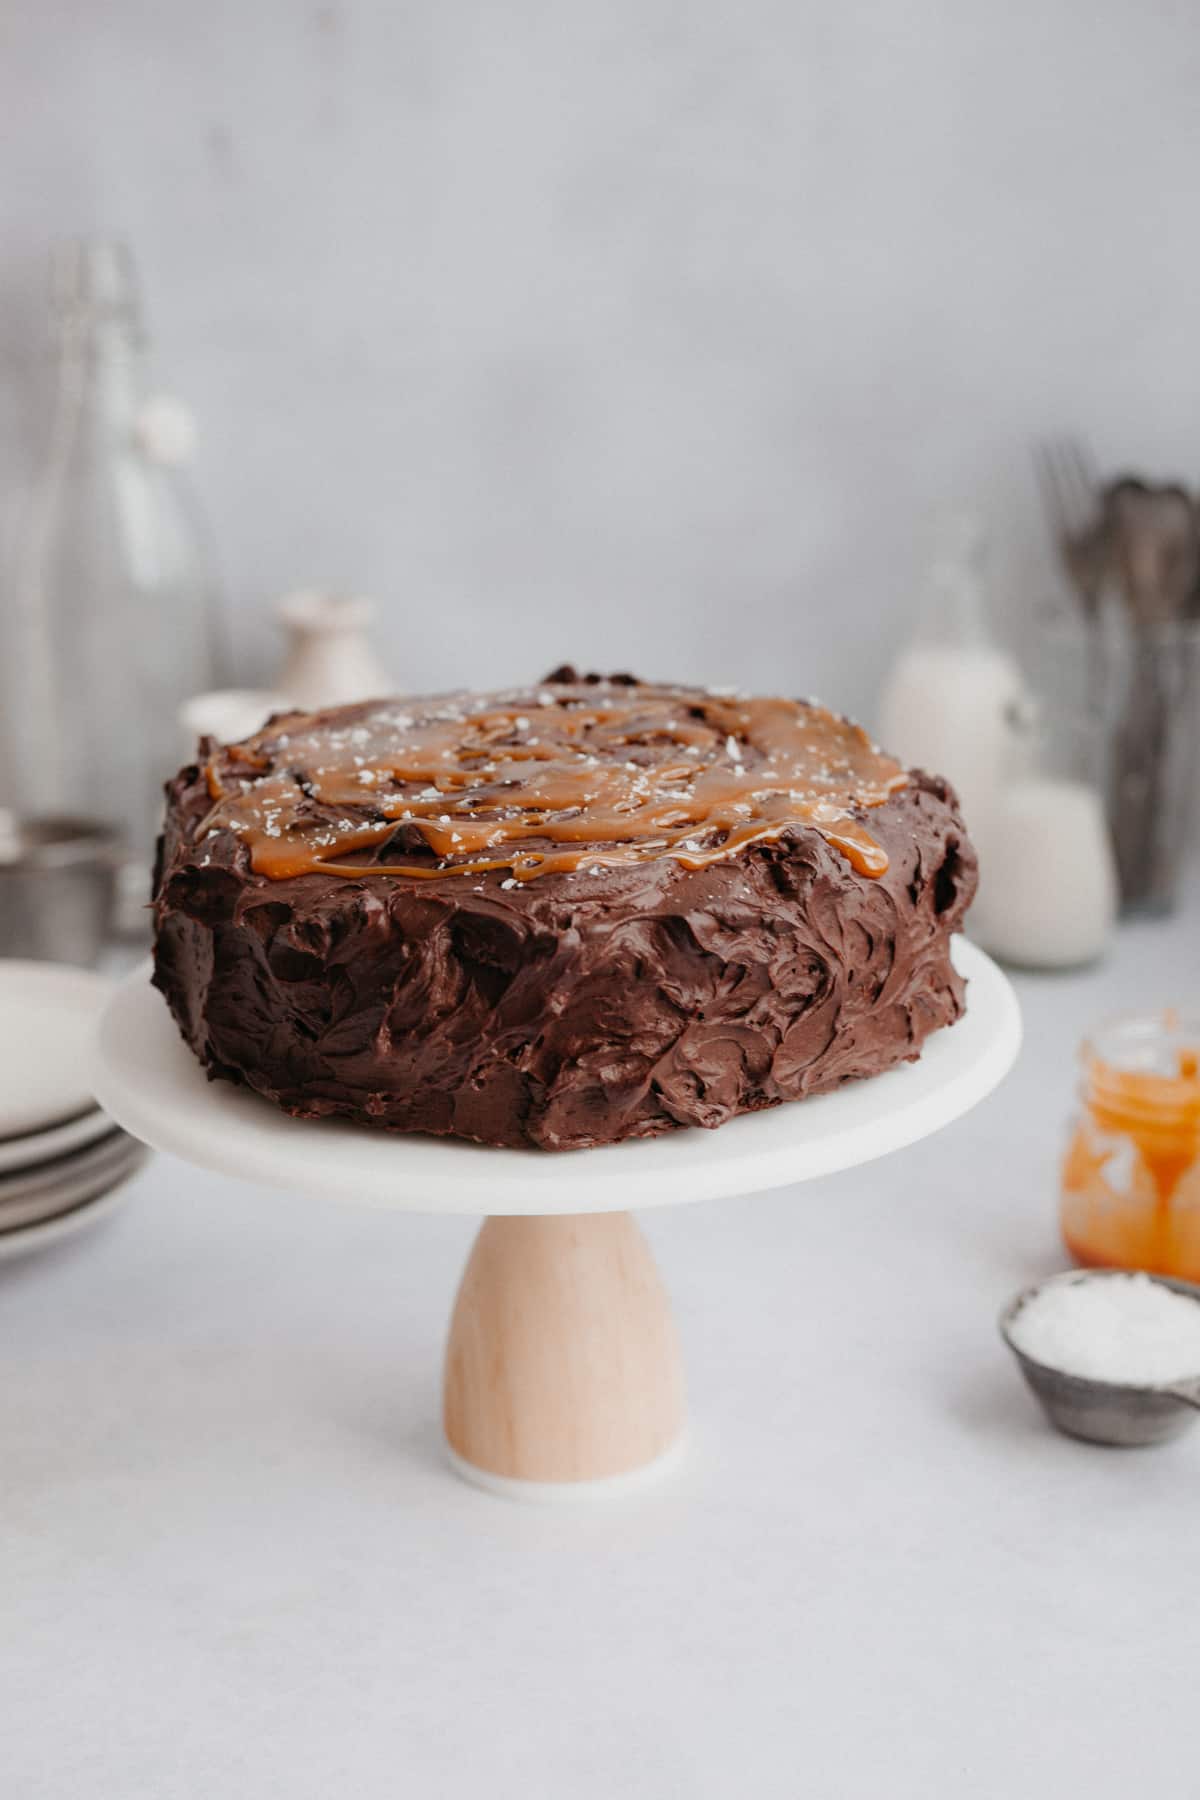 A chocolate cake with a caramel topping on a cake stand